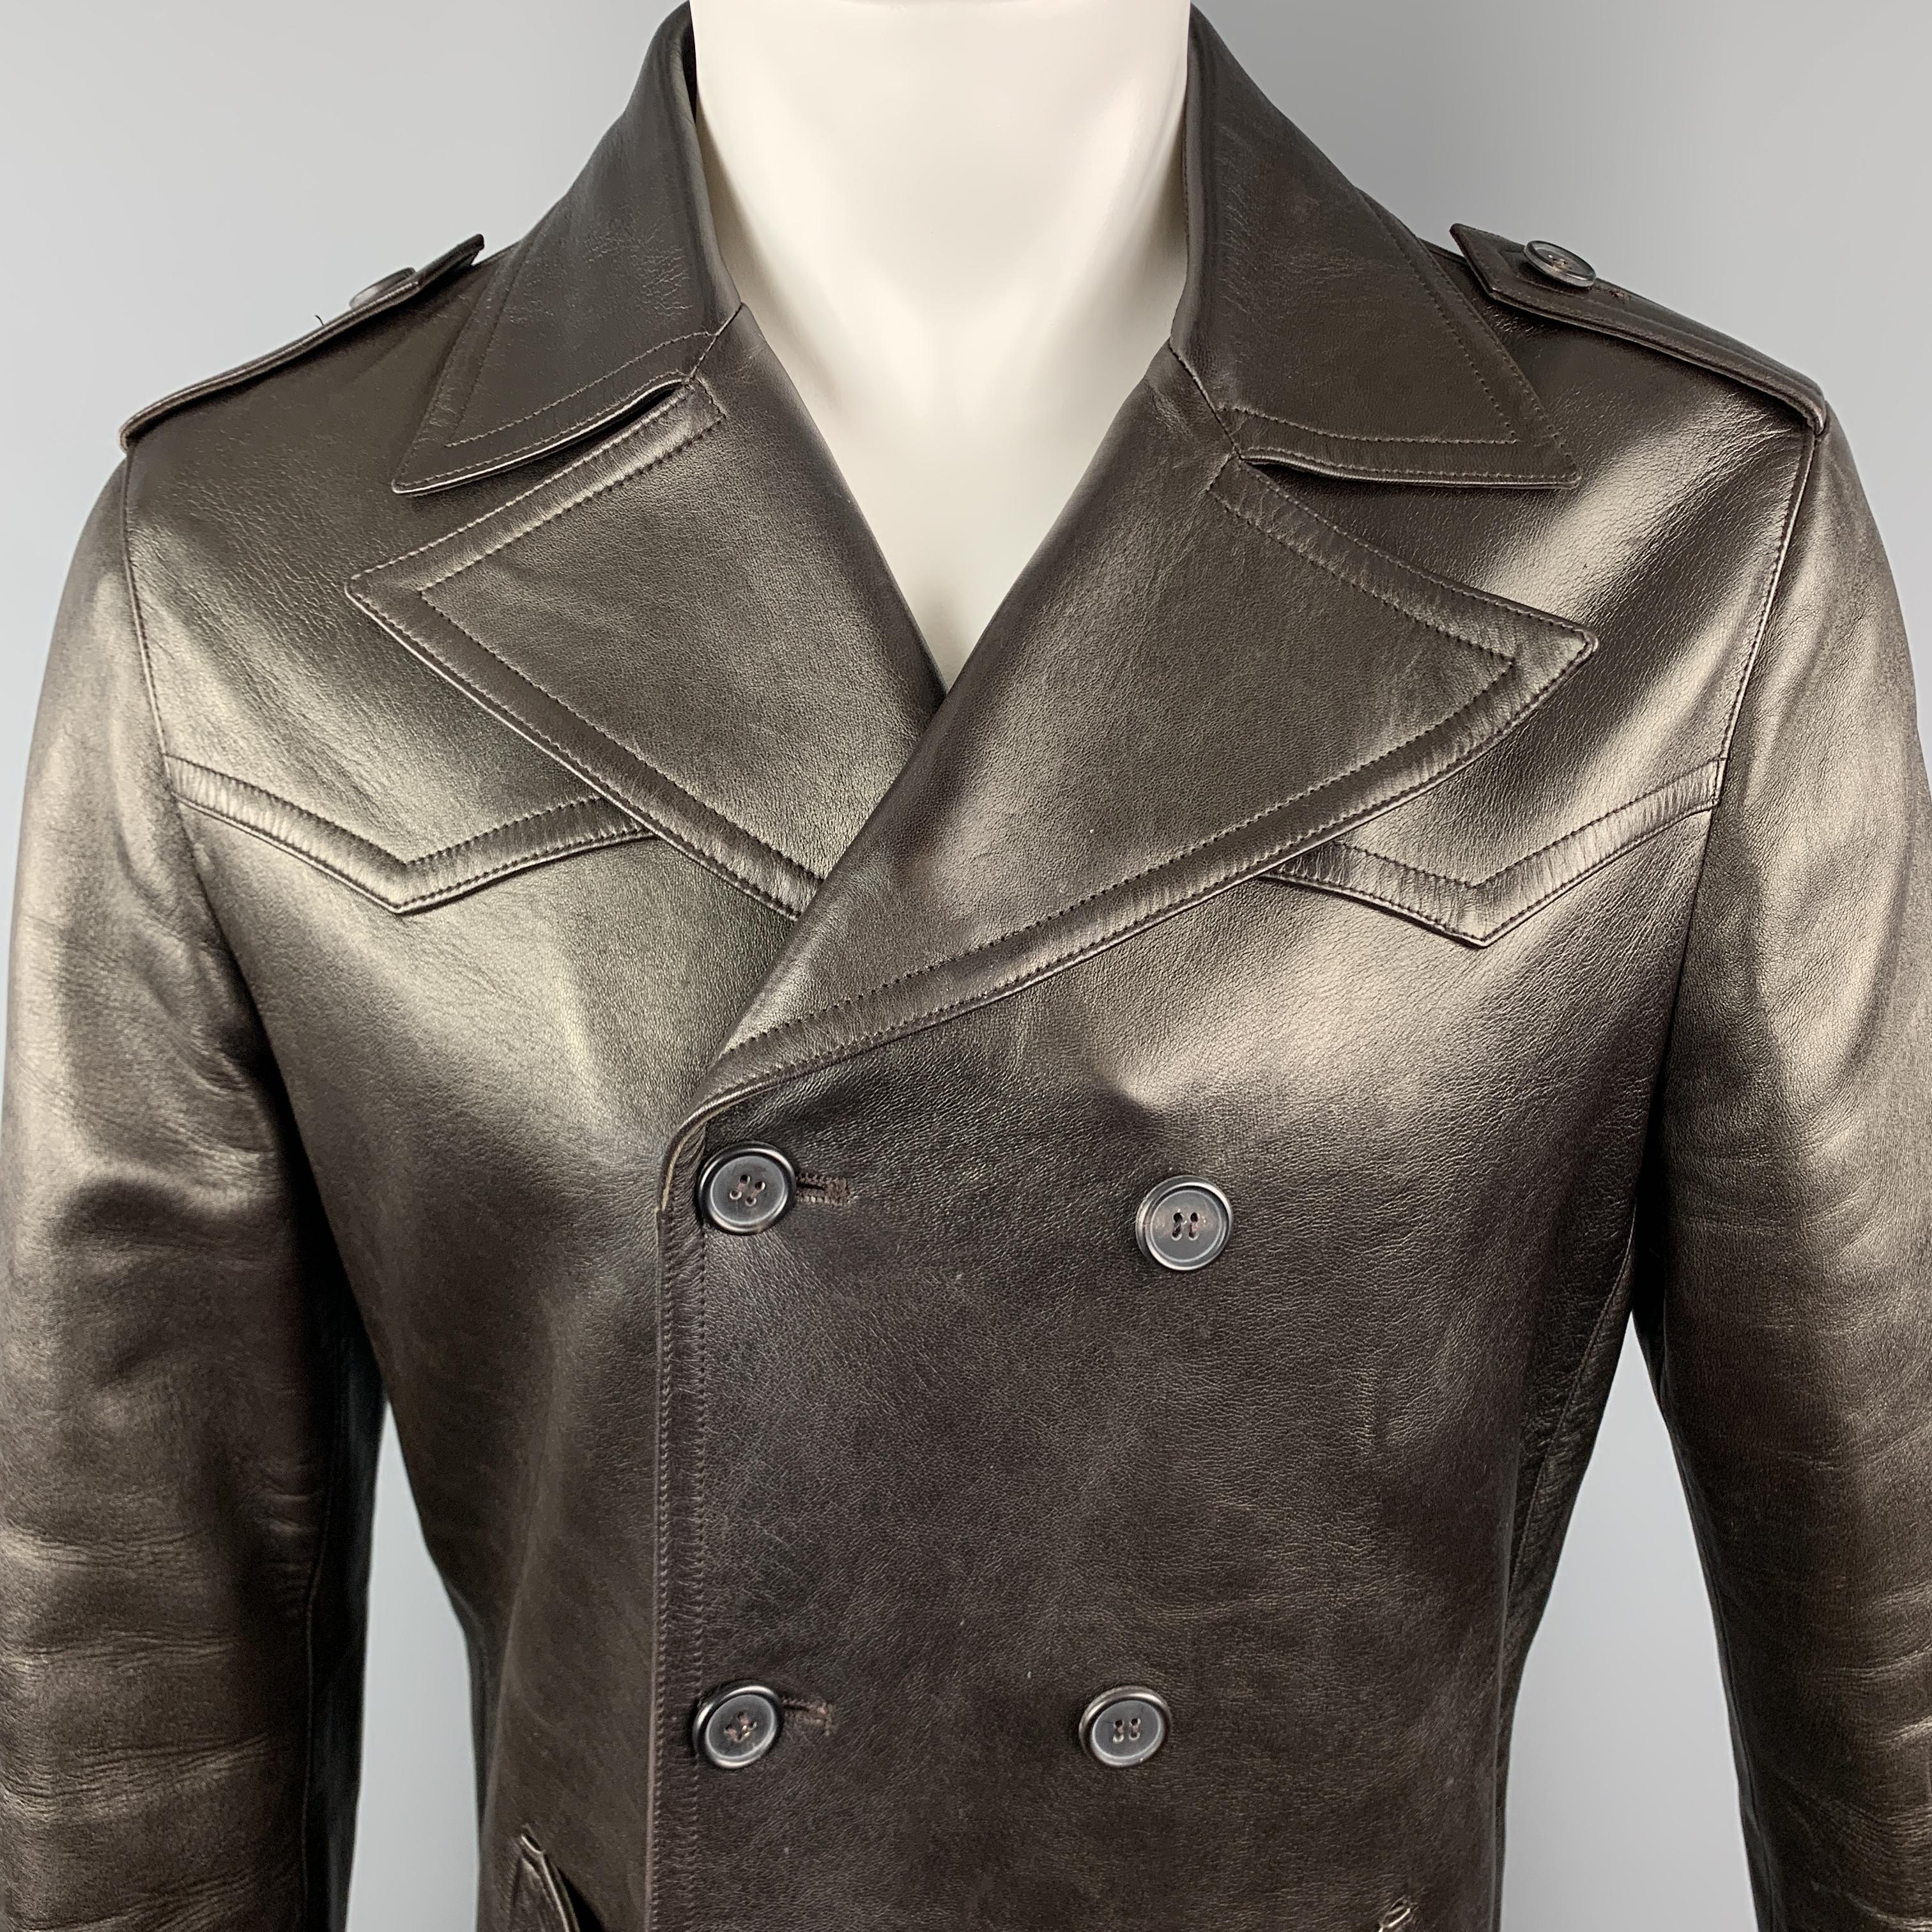 NEIL BARRETT trench style coat comes n chocolate brown leather with epaulets, double breasted button front, pointed lapel, and flap pockets. With dust bag. Made in Italy.

Excellent Pre-Owned Condition.
Marked: M

Measurements:

Shoulder: 18